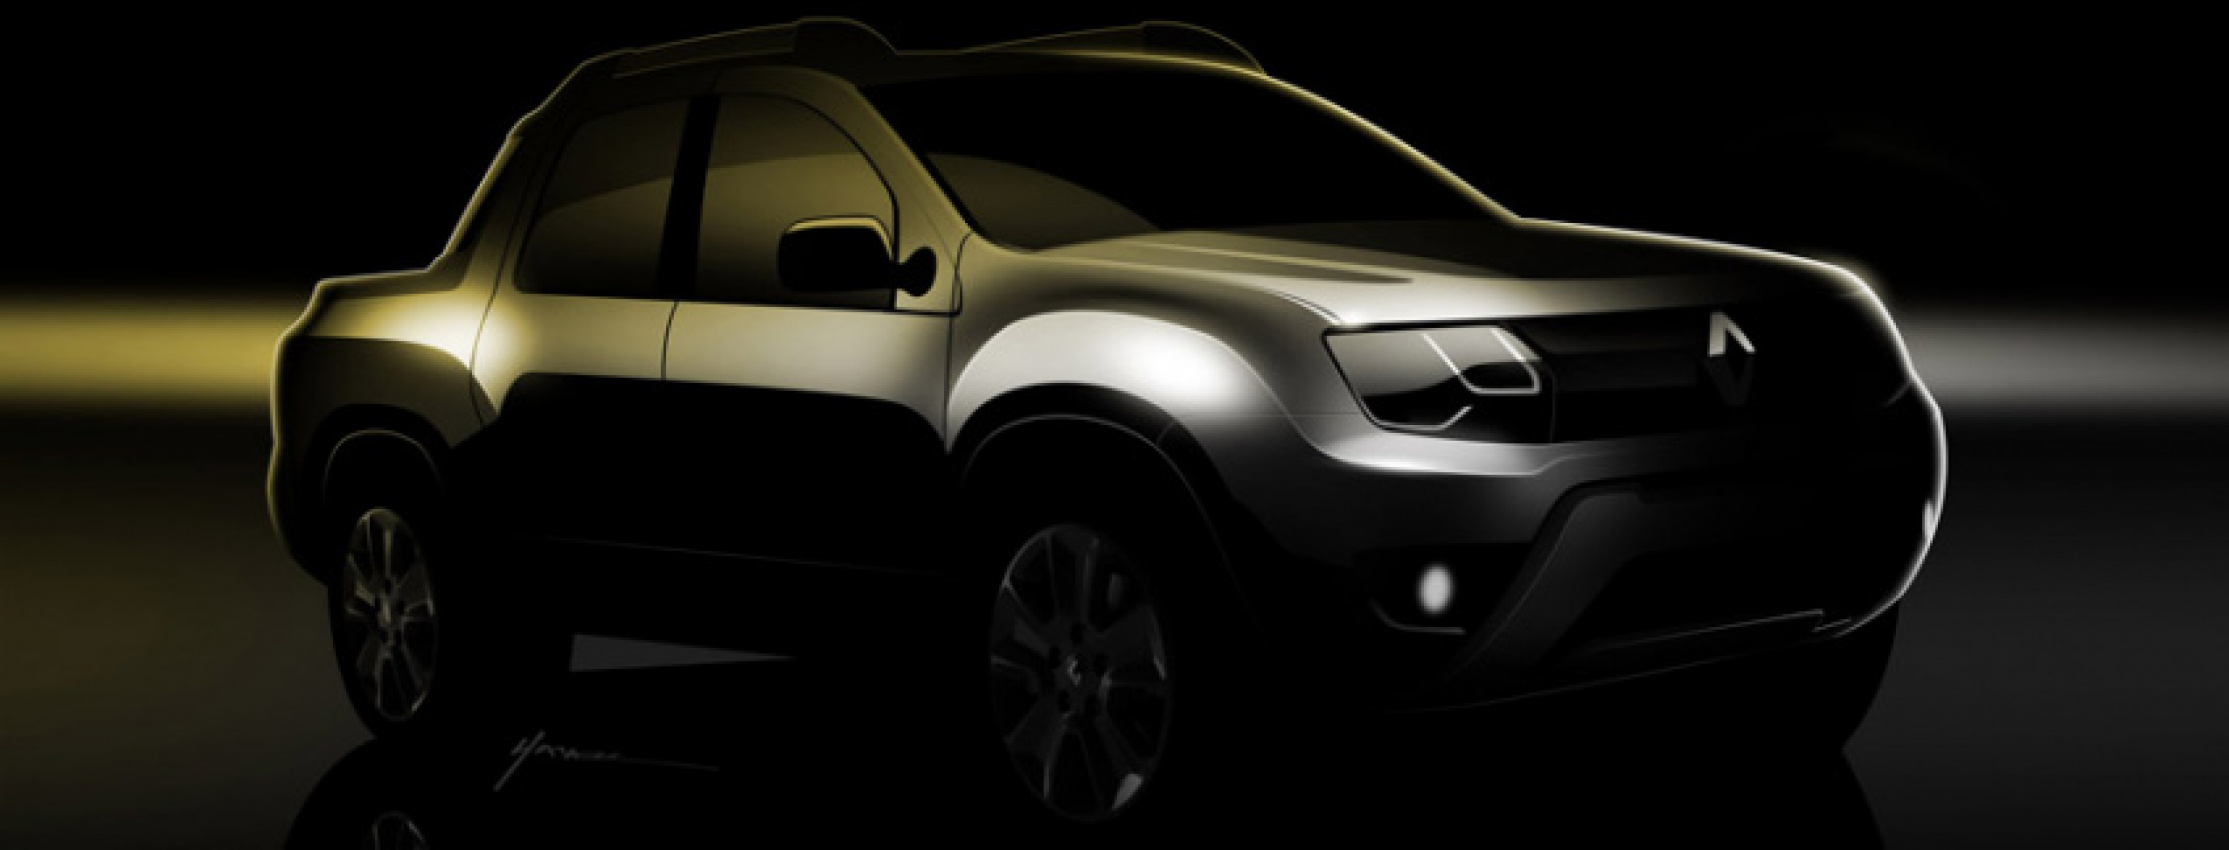 autos, cars, renault, renault duster, renault duster pickup to be revealed june 18